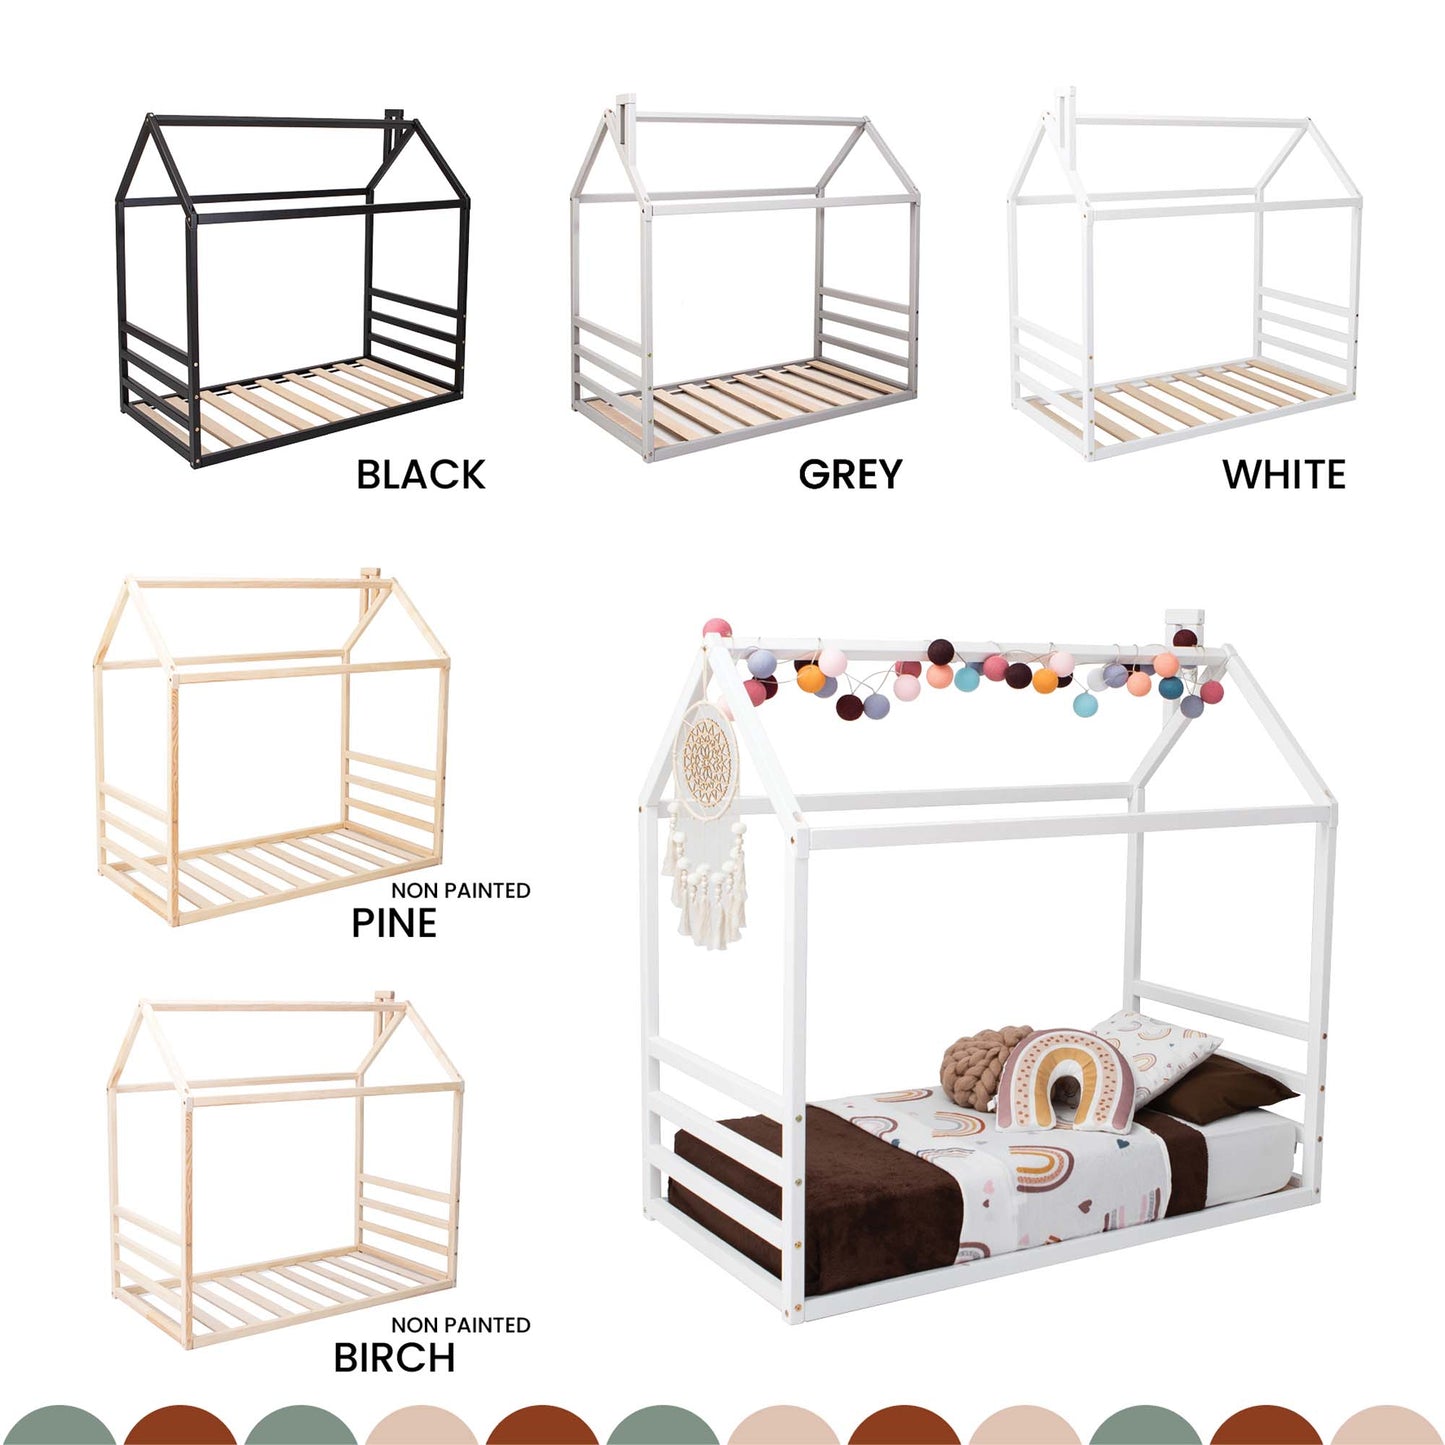 Image showcasing six variants of a Floor house-frame bed with a horizontal headboard and footboard in different colors: black, grey, white, non-painted pine, non-painted birch, and a decorated white Montessori house bed with a mattress and bedding.